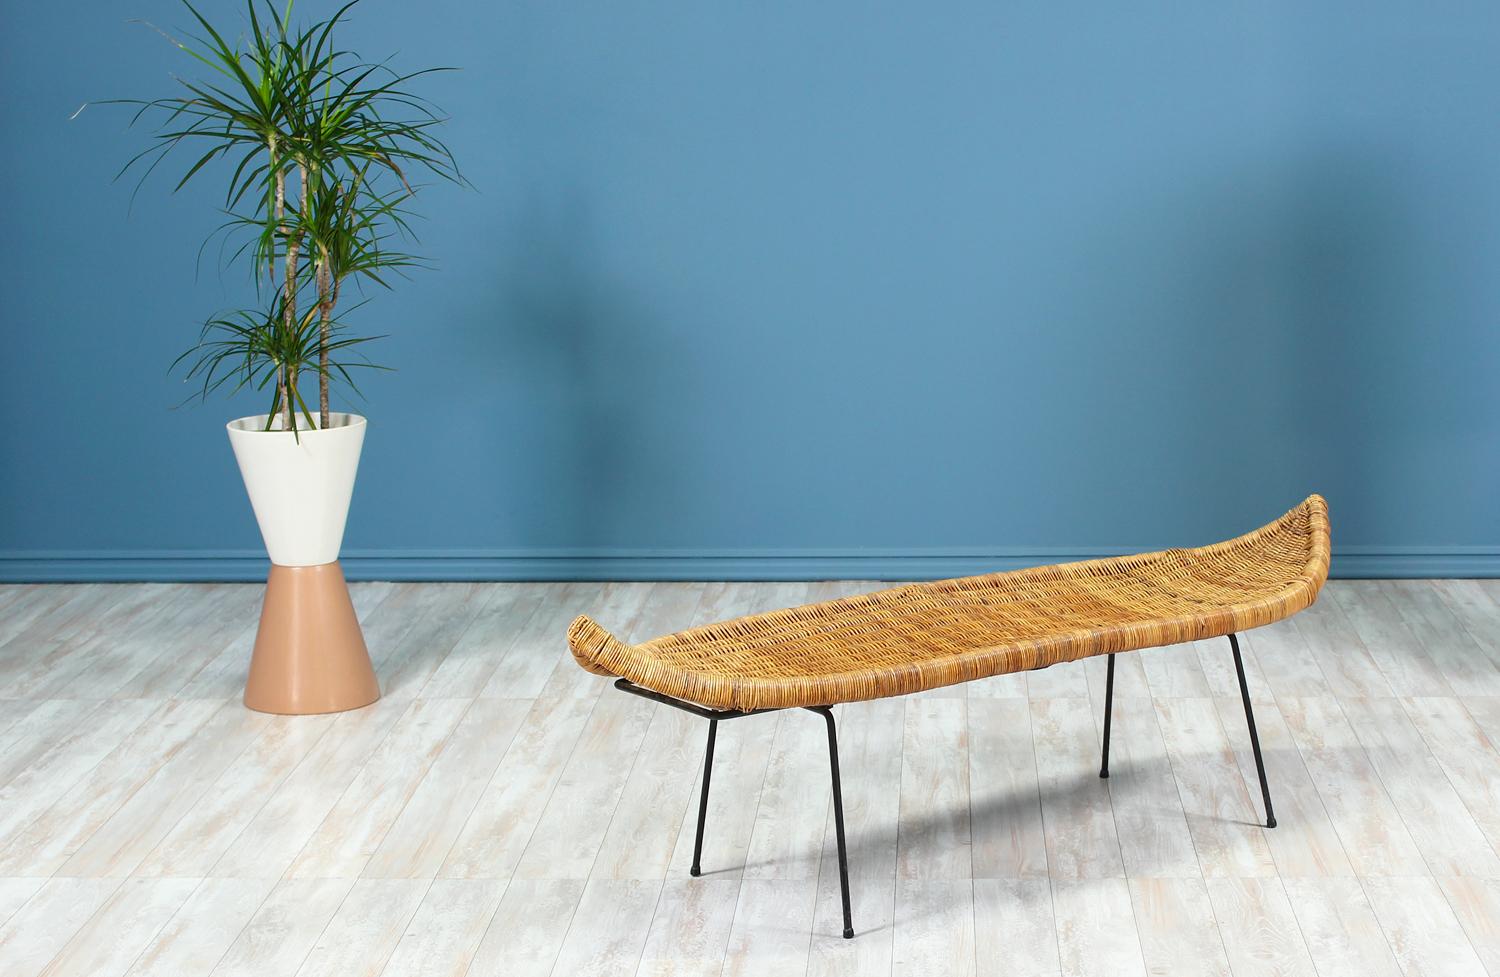 Spectacular cane bench designed by Danny Ho Fong for Tropi-Cal in the United States circa 1960’s. This fabulous Mid-Century Modern bench maintains its original intricately woven wicker seat rest and iron base to preserve its vintage value. The seat